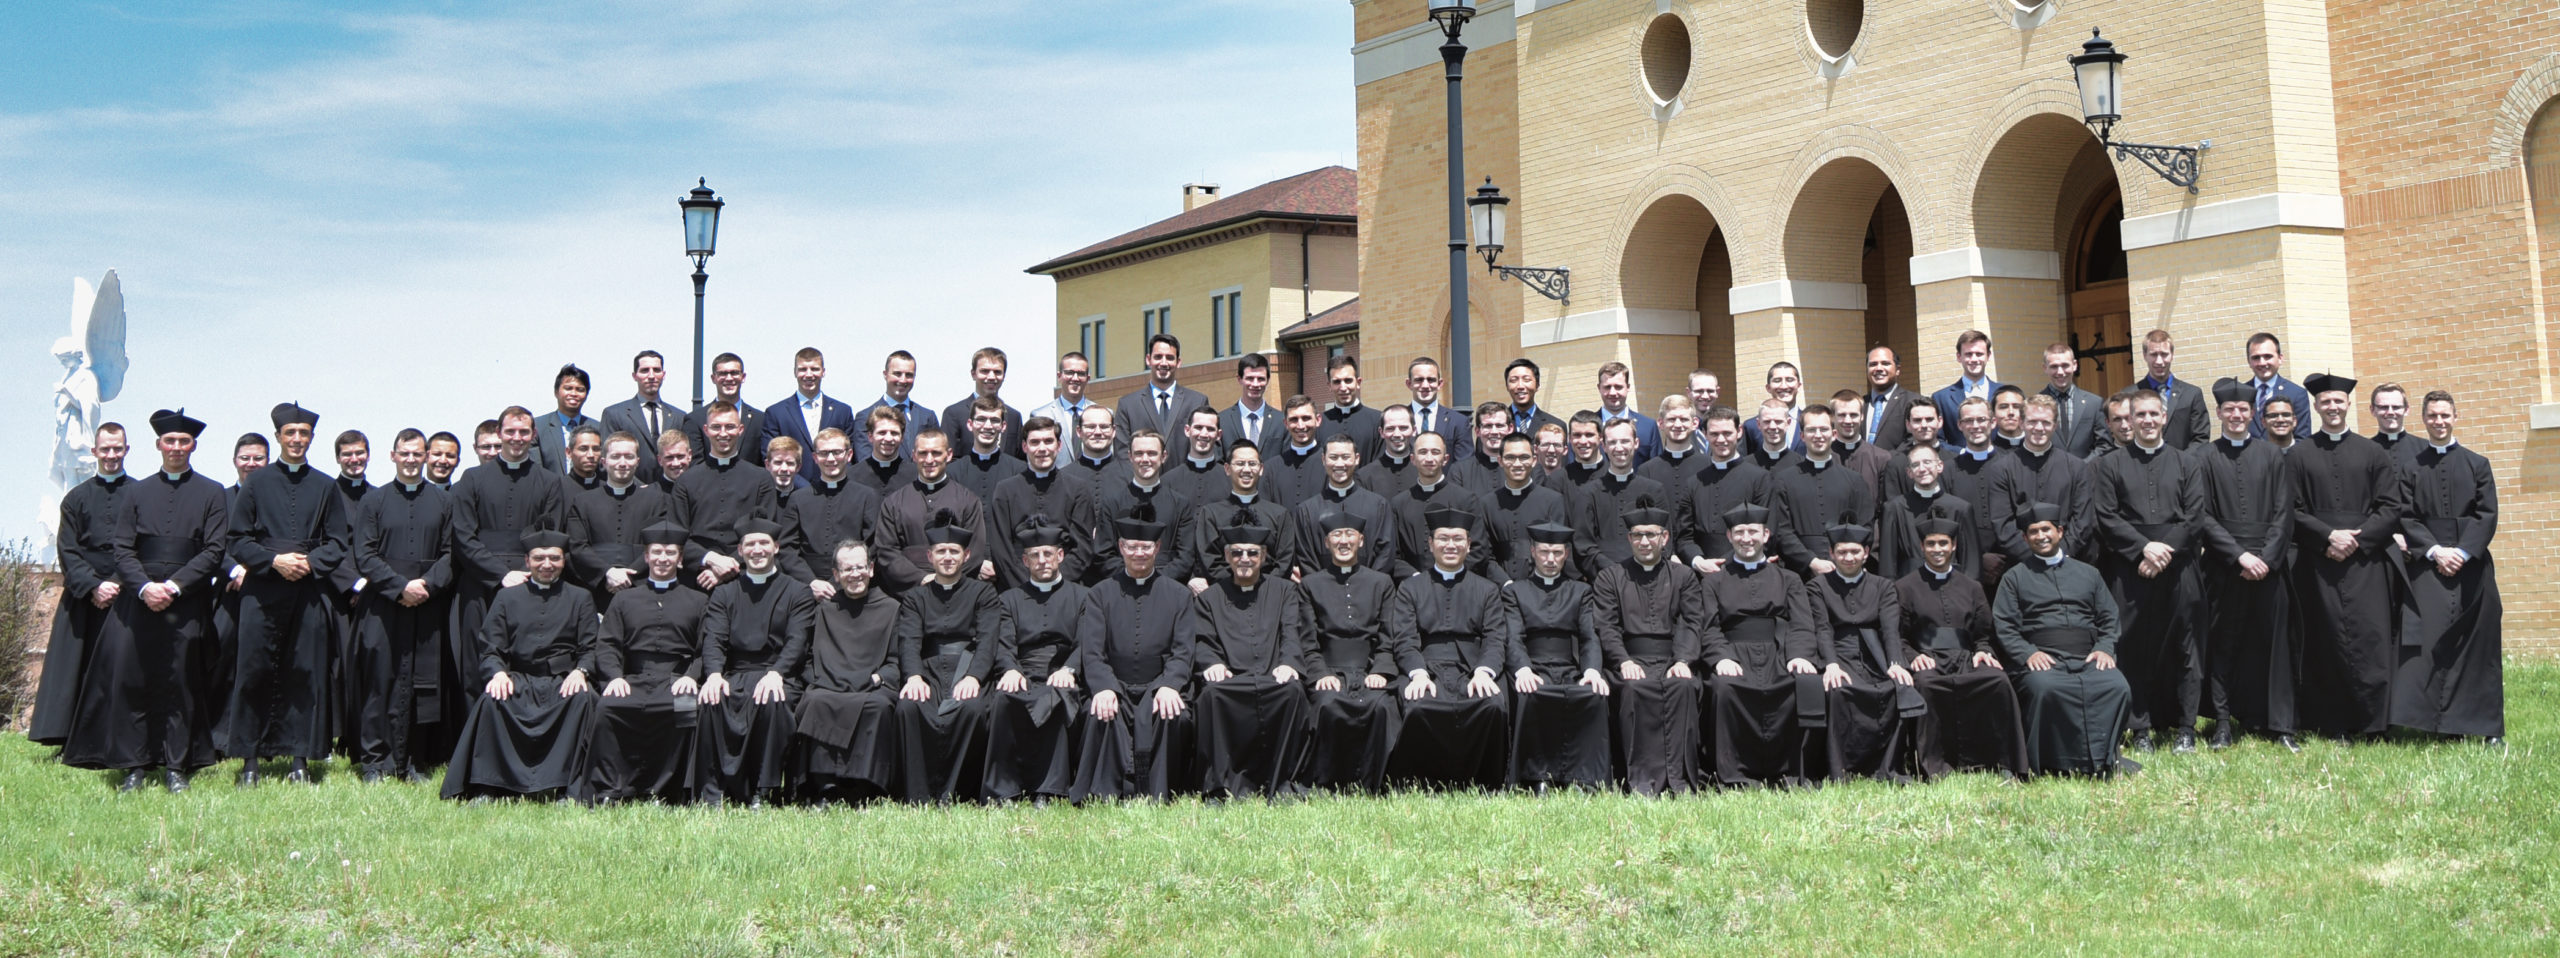 Donate to Our Lady of Guadalupe Seminary Priestly Fraternity of St. Peter